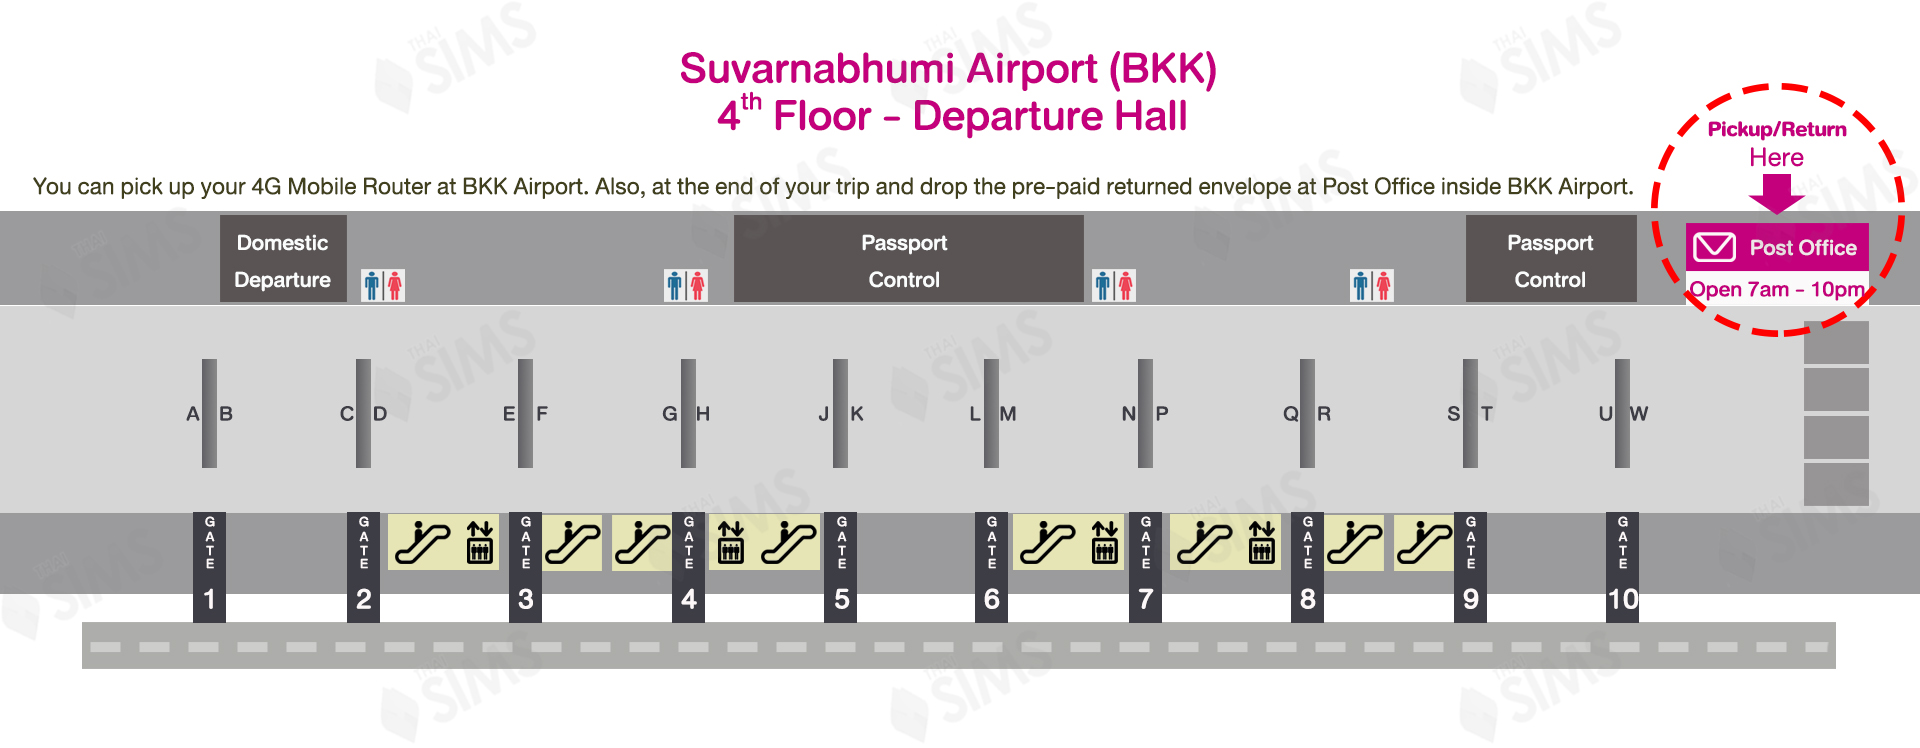 BKK Airport for Pickup and Return Covid Version